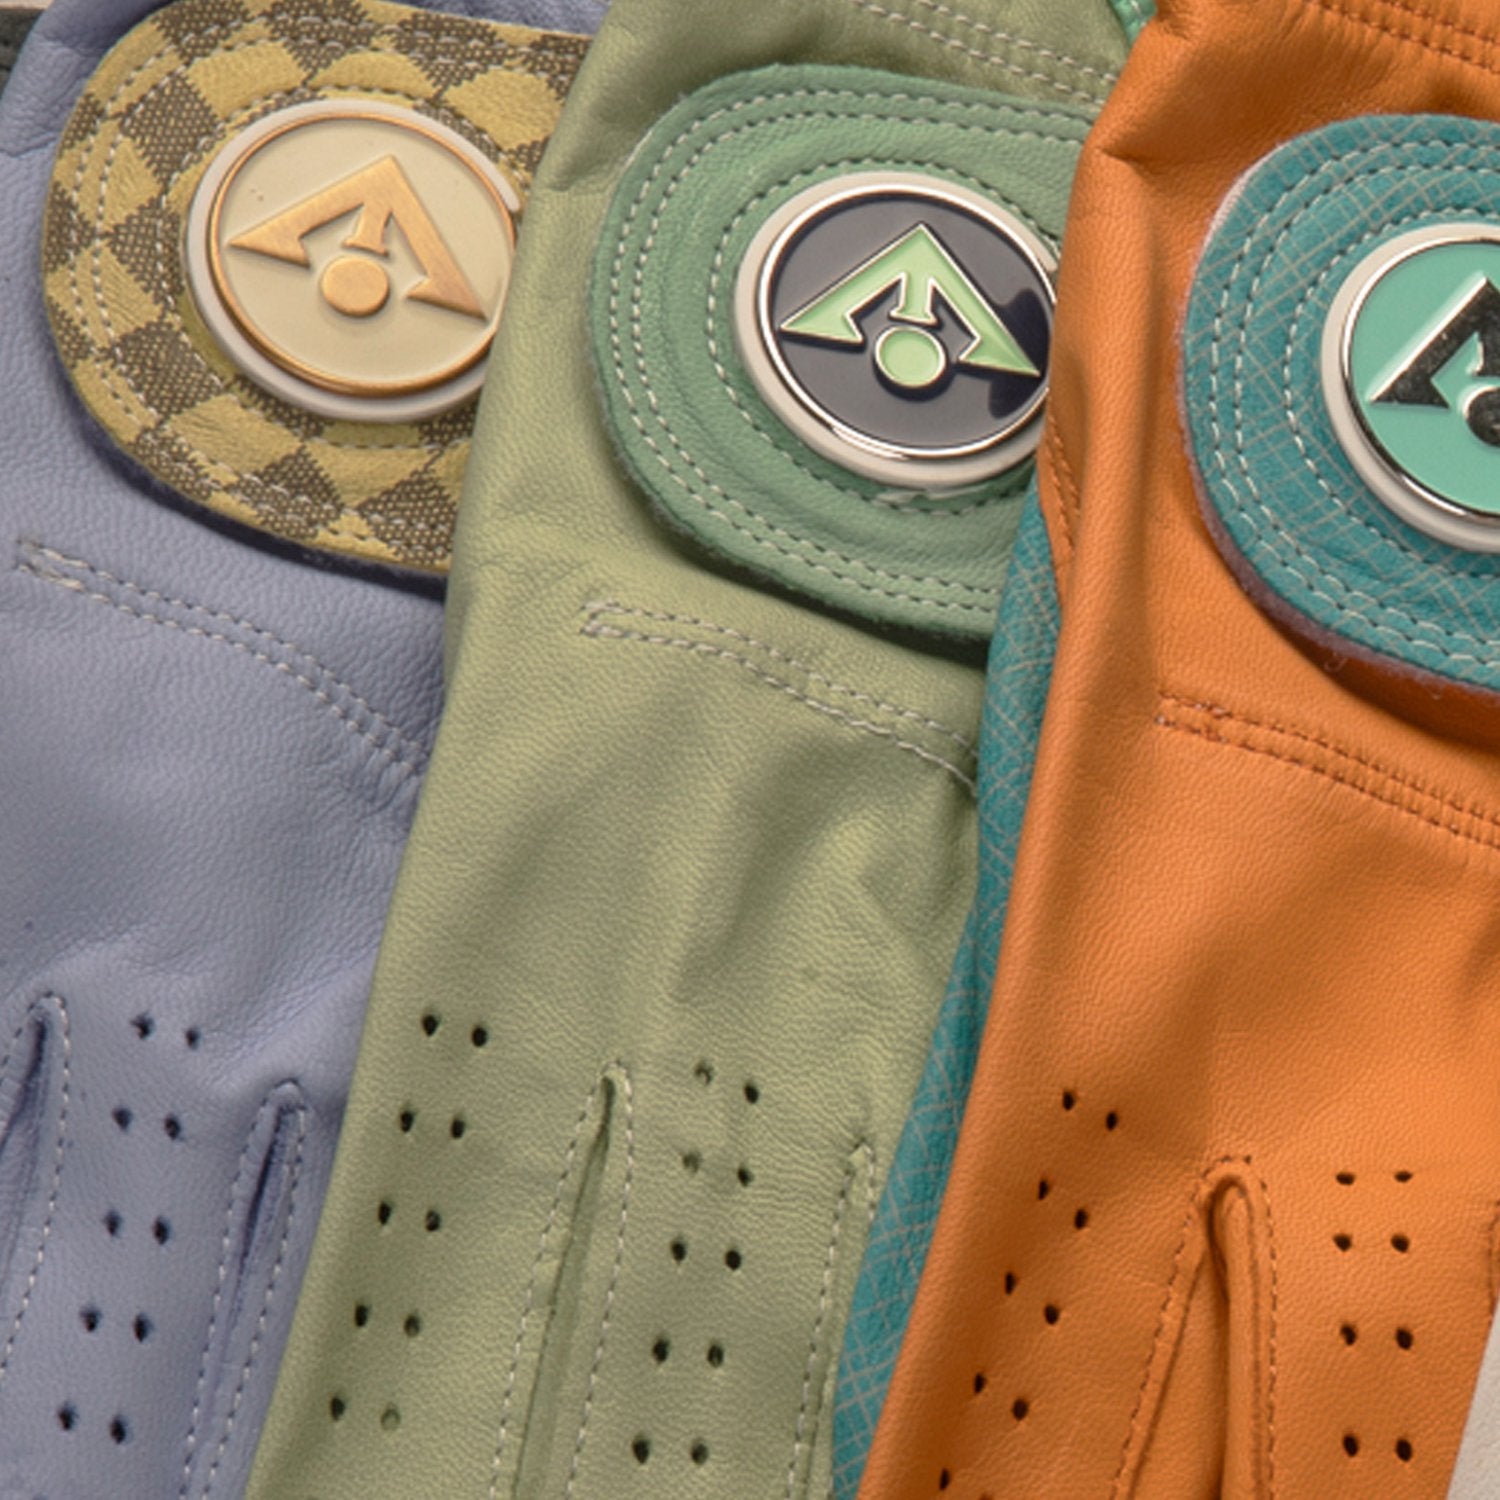 Close up shot of premium women's leather golf gloves in purple, green, and orange side by side.